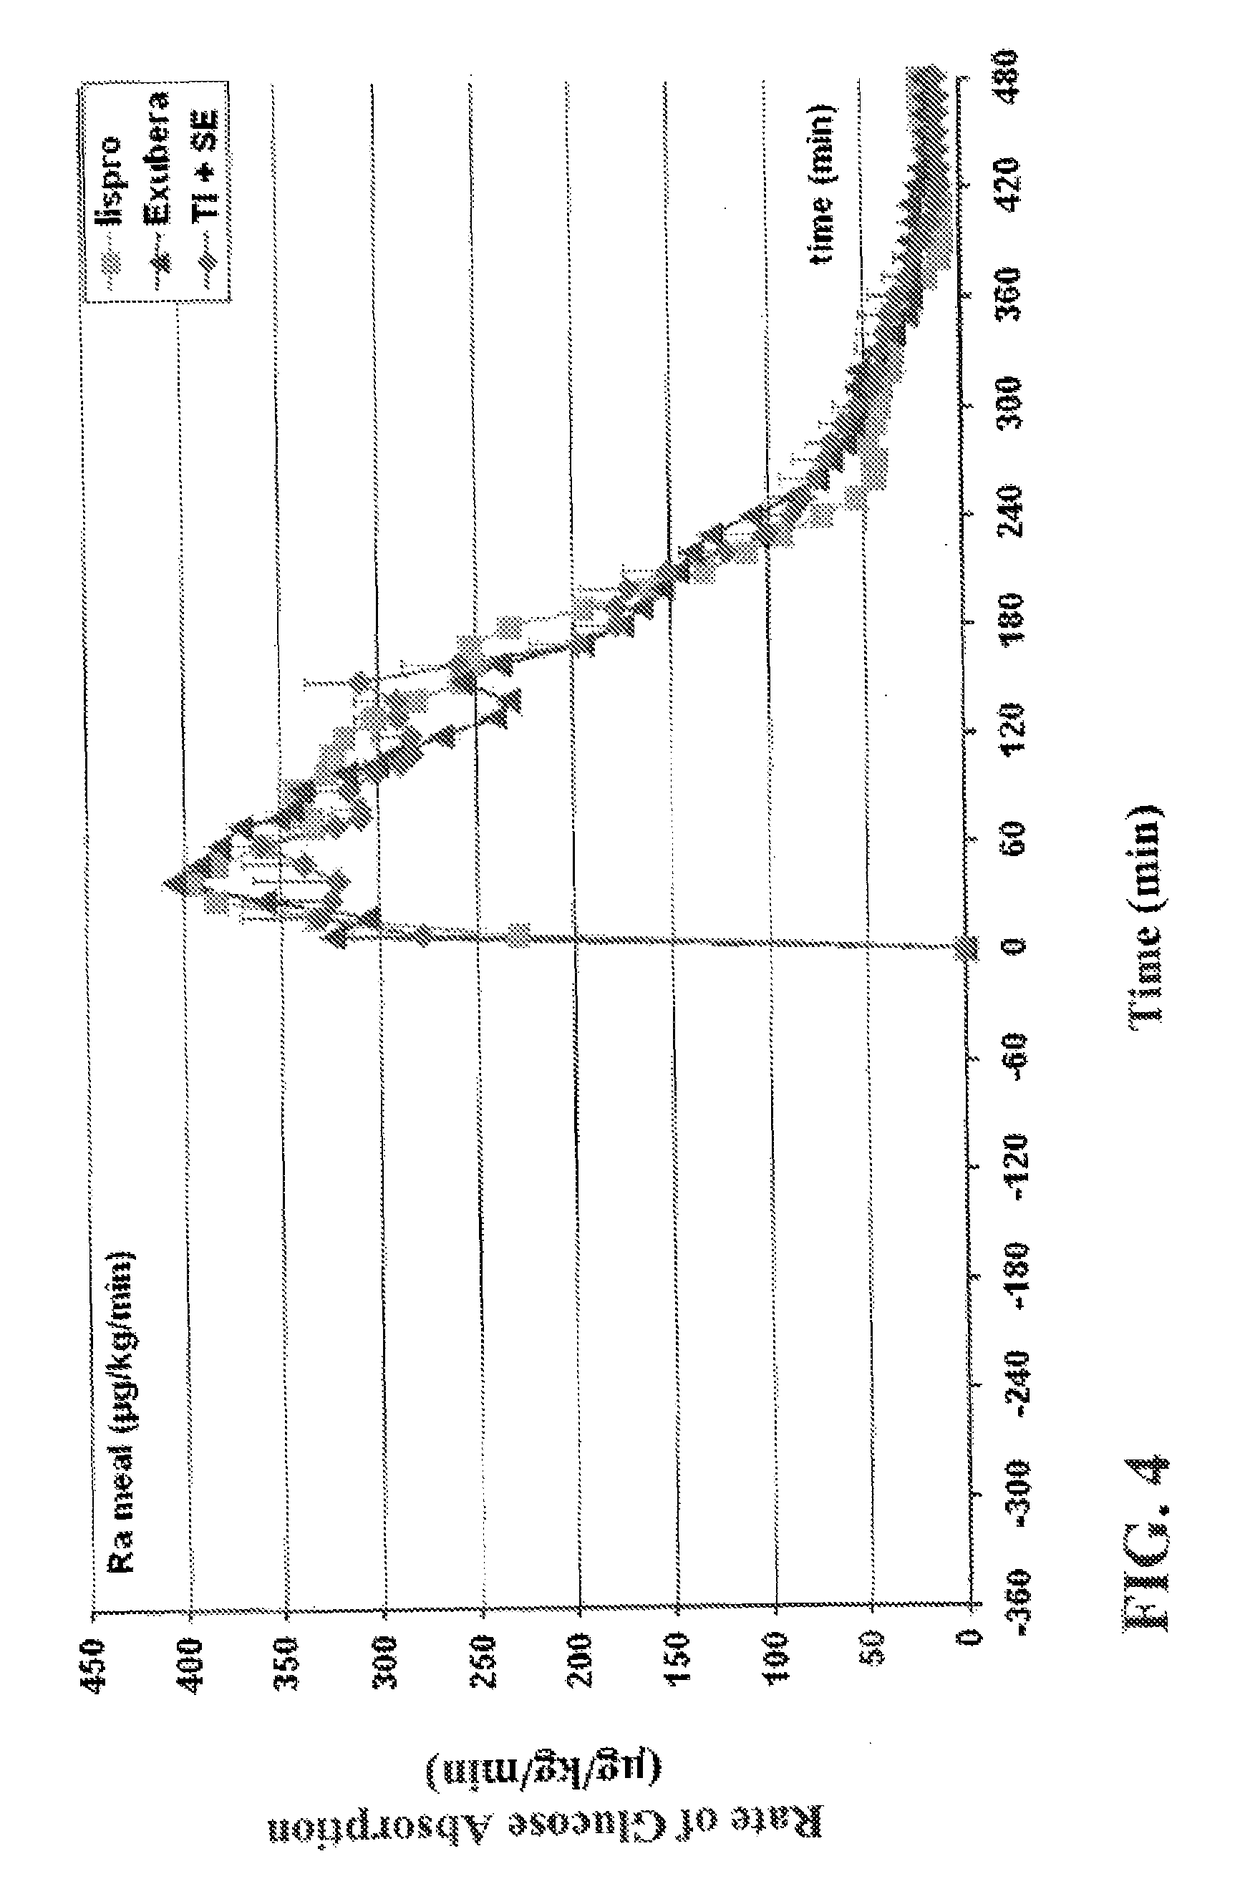 Method of treating diabetes type 2 by metformin and an ultrarapid acting insulin